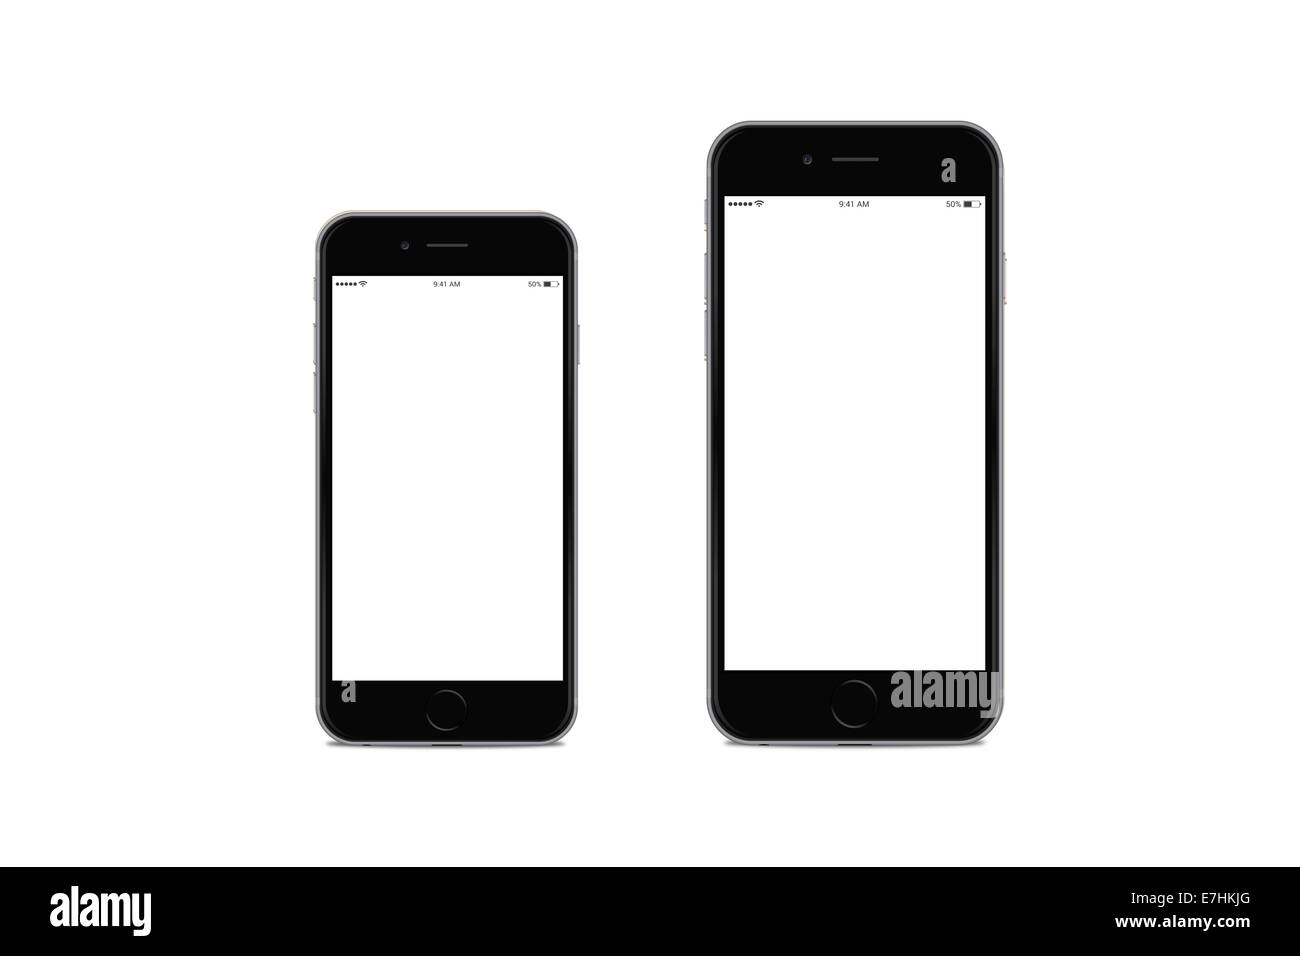 iphone 6 white and black